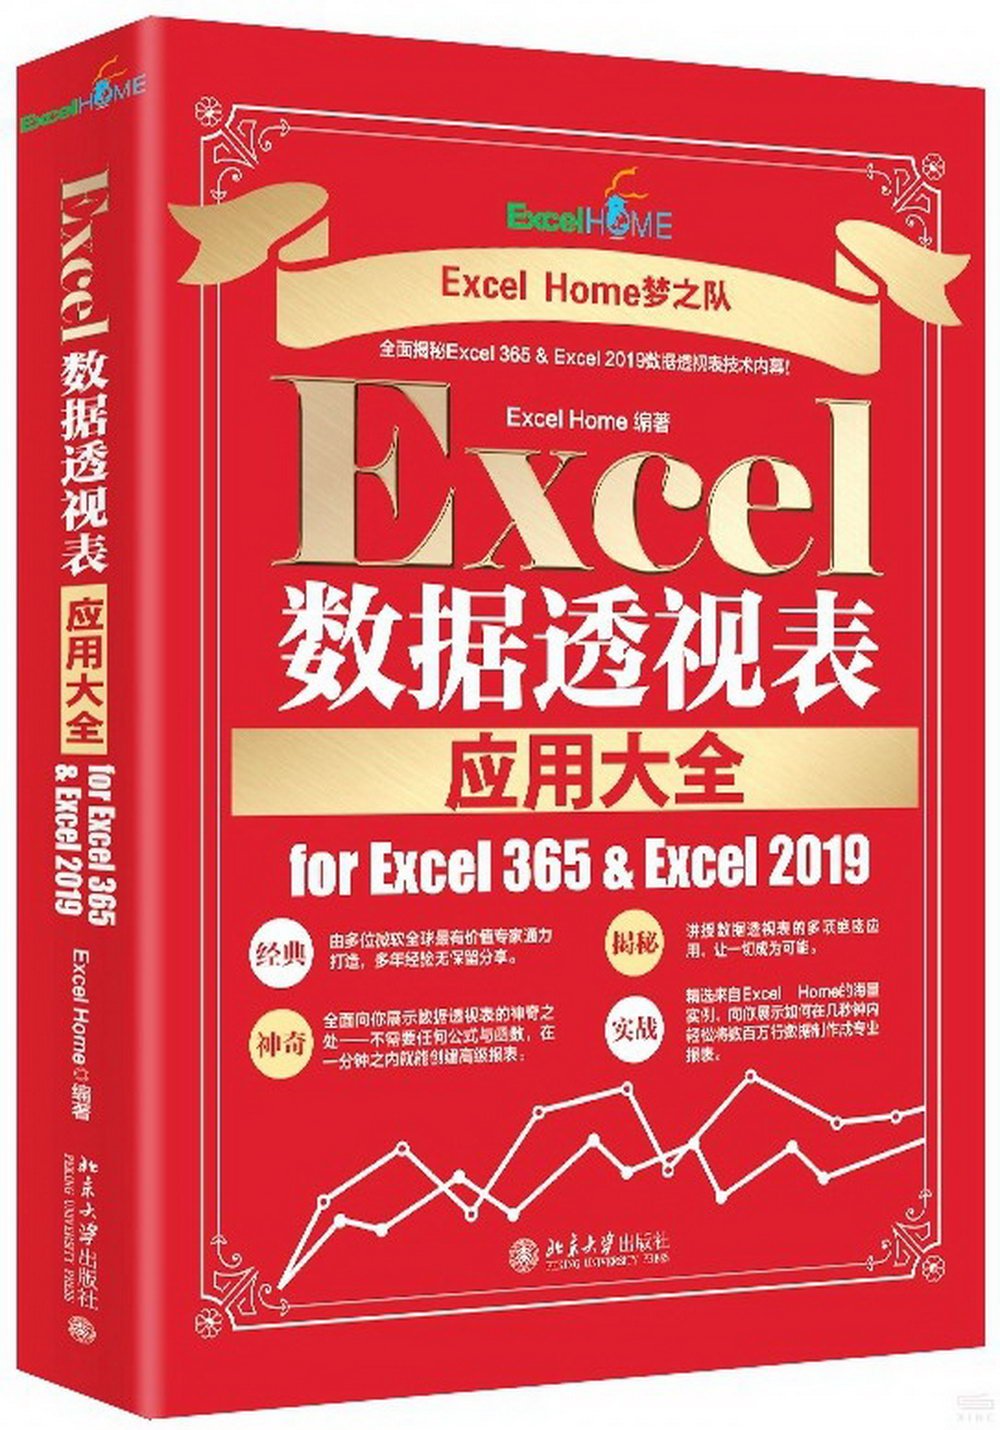 Excel數據透視表應用大全for Excel 365 & Excel 2019